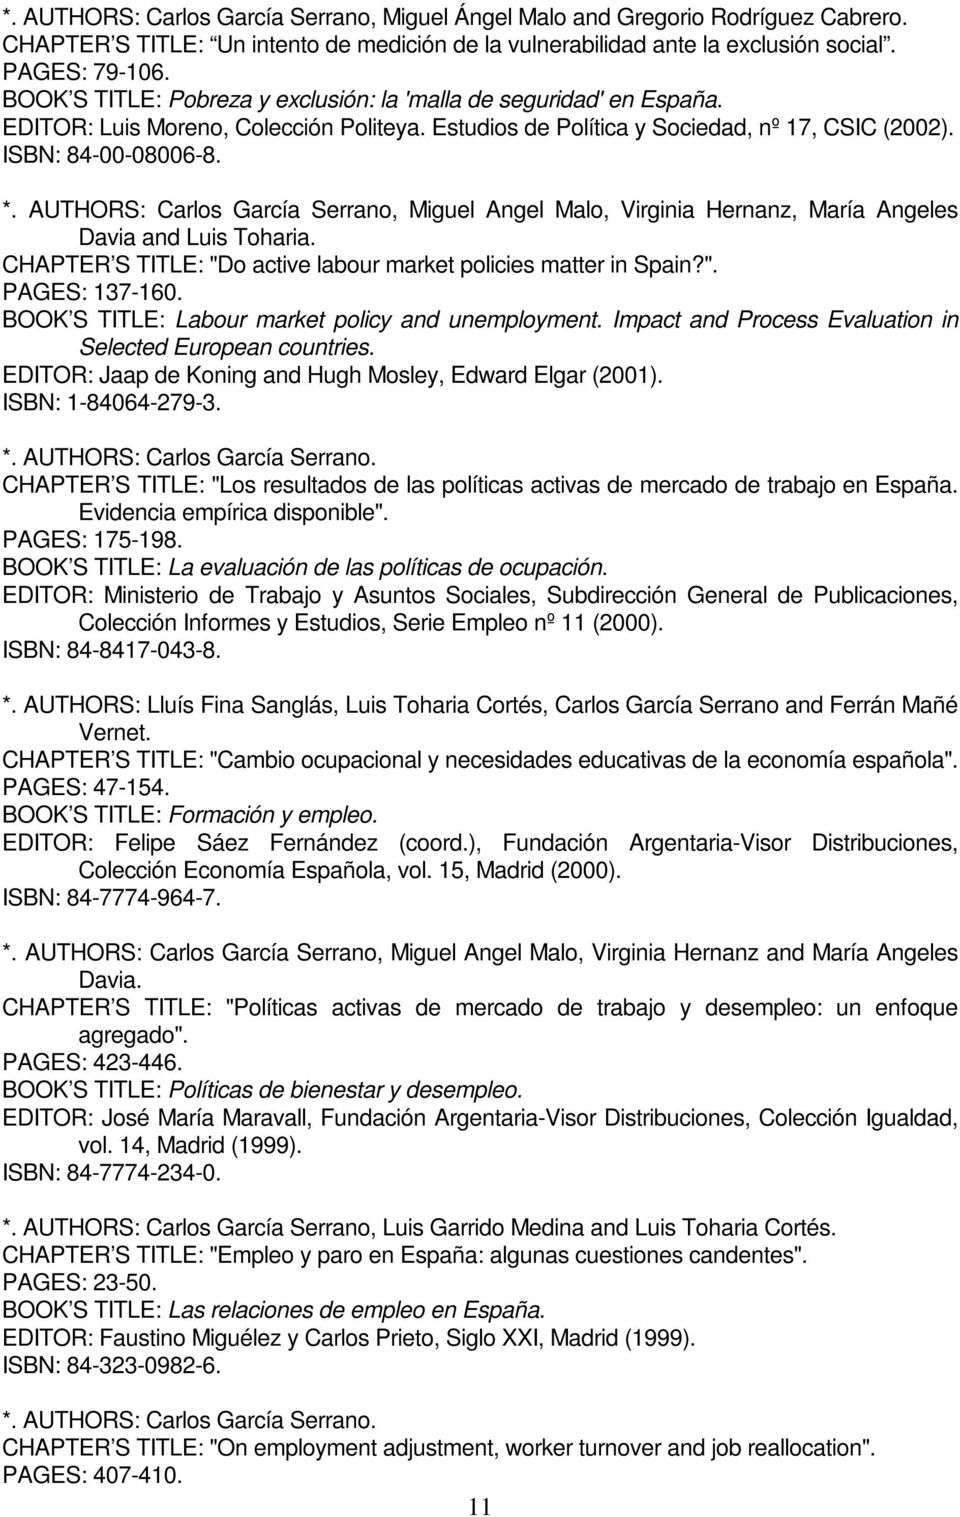 AUTHORS: Carlos García Serrano, Miguel Angel Malo, Virginia Hernanz, María Angeles Davia and Luis Toharia. CHAPTER S TITLE: "Do active labour market policies matter in Spain?". PAGES: 137-160.